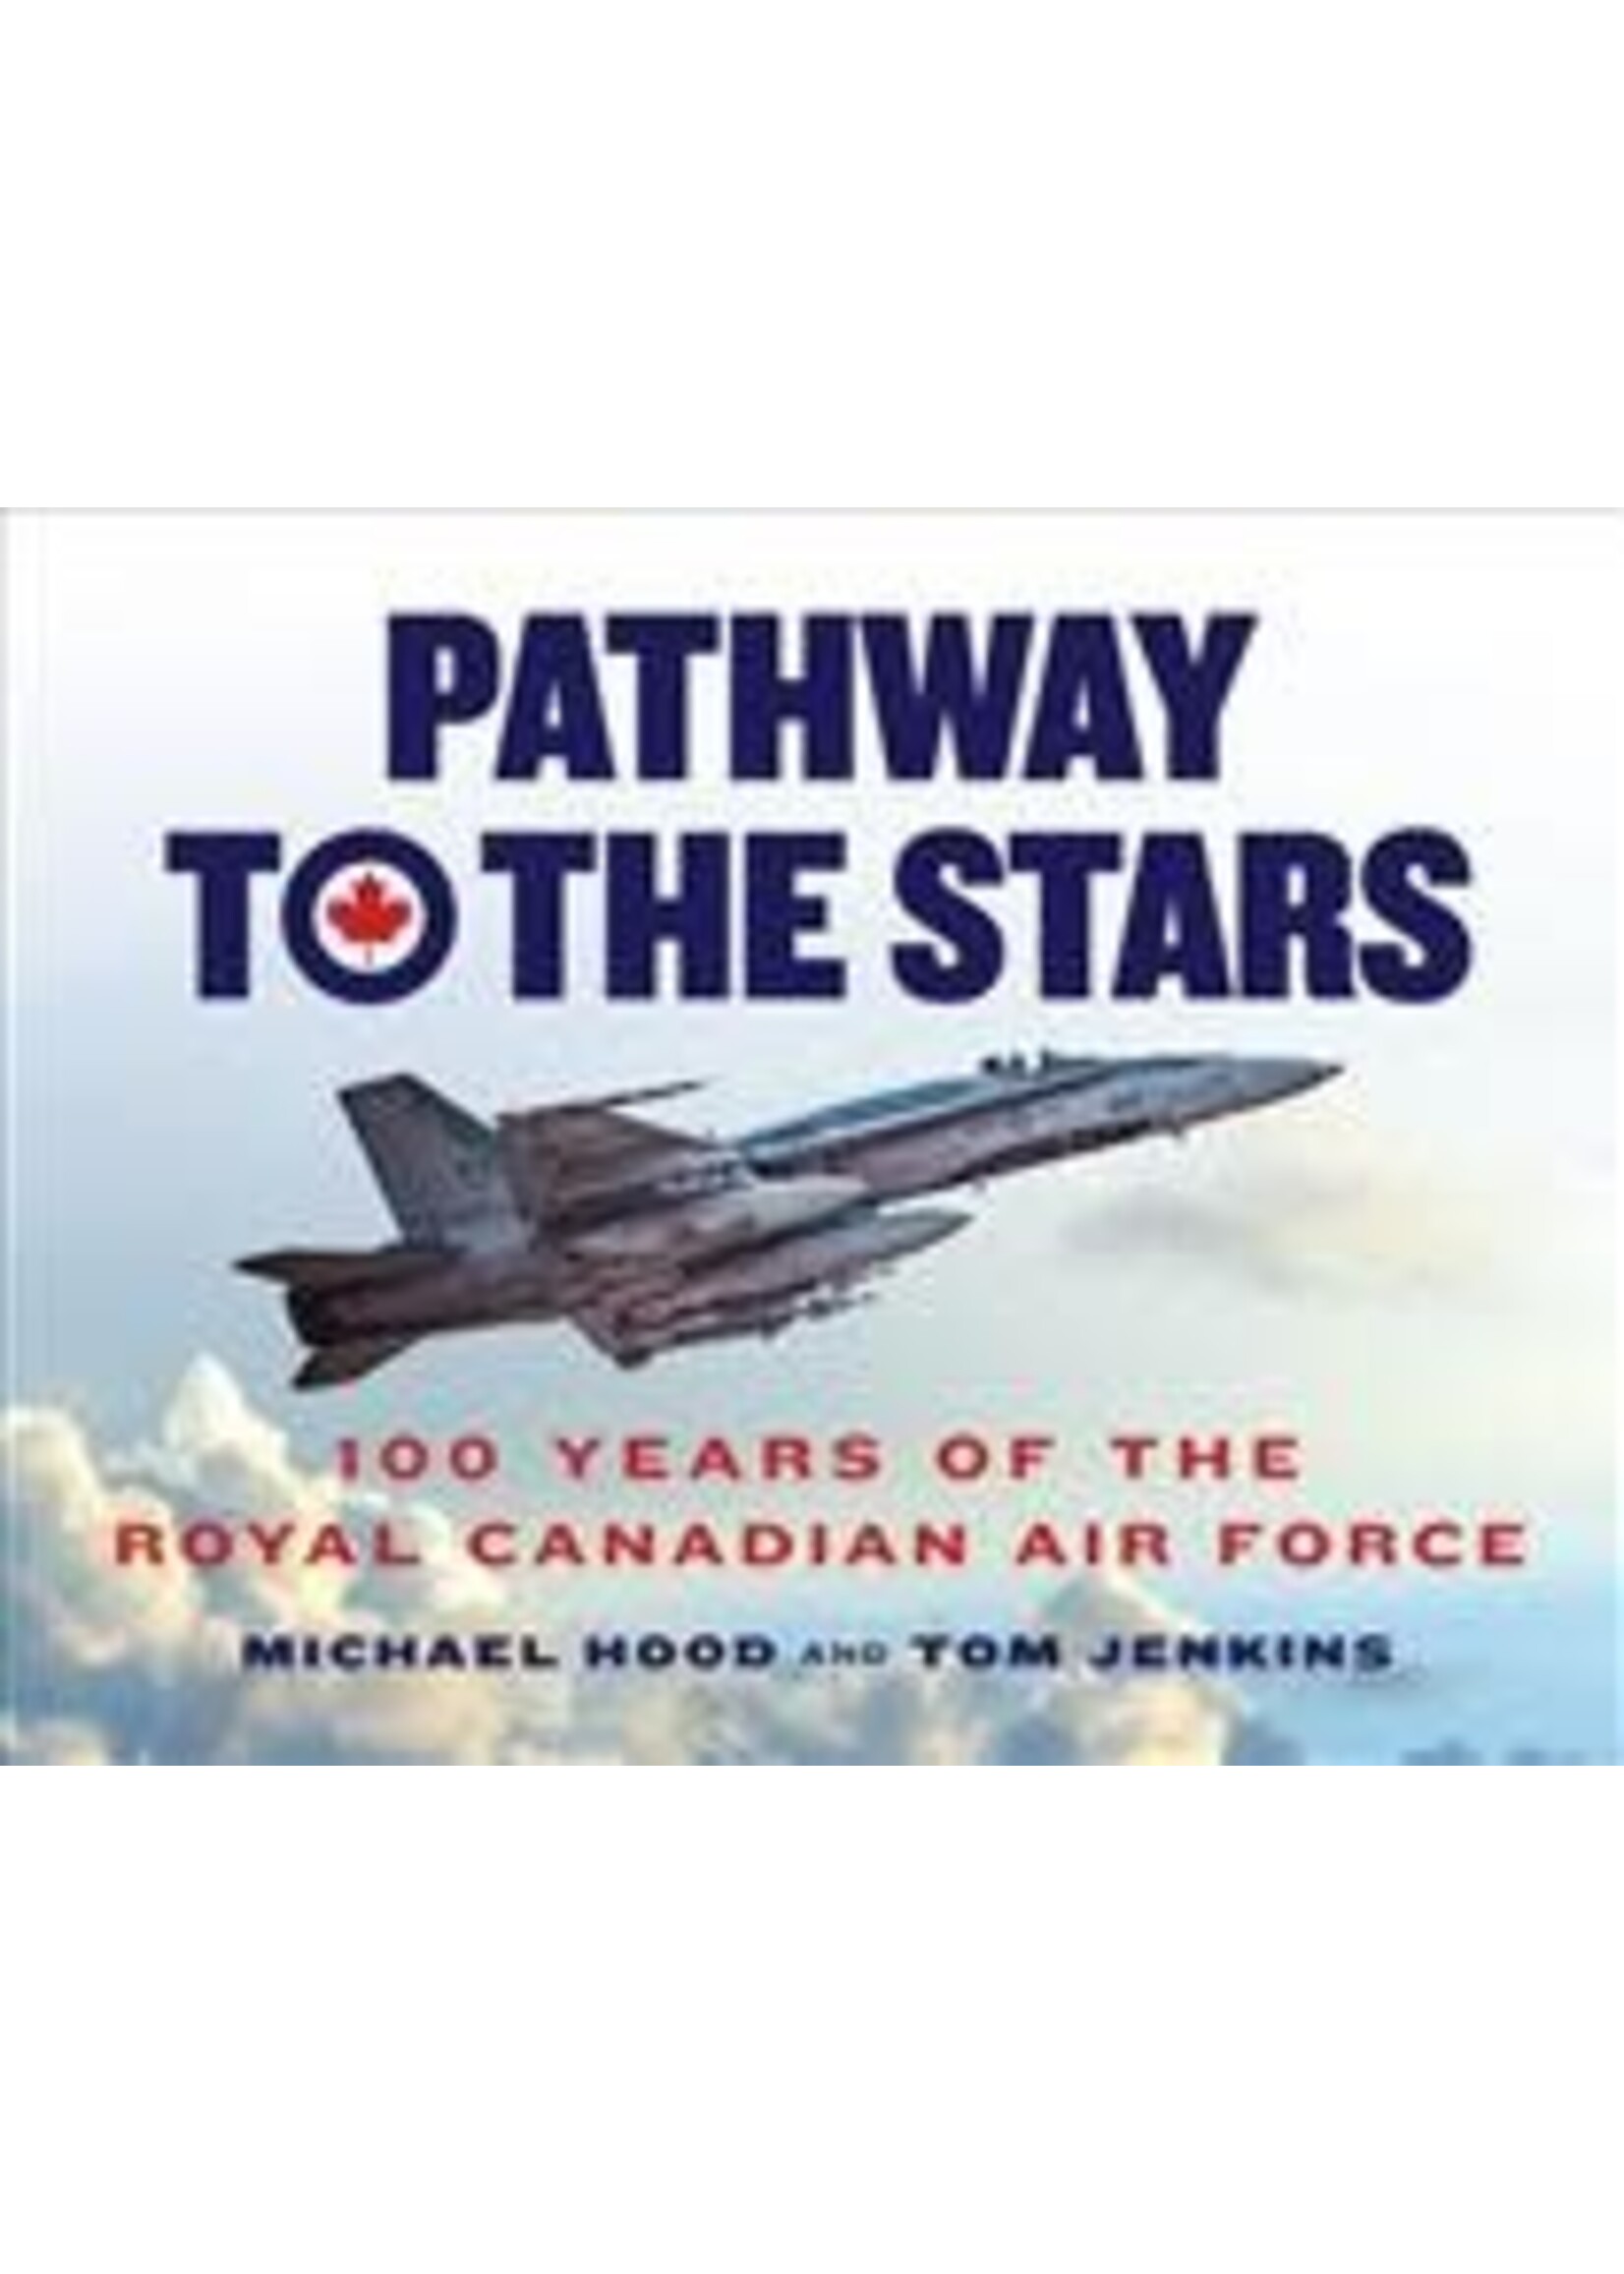 Pathway to the Stars: One Hundred Years of the Royal Canadian Air Force by Michael Hood, Tom Jenkins